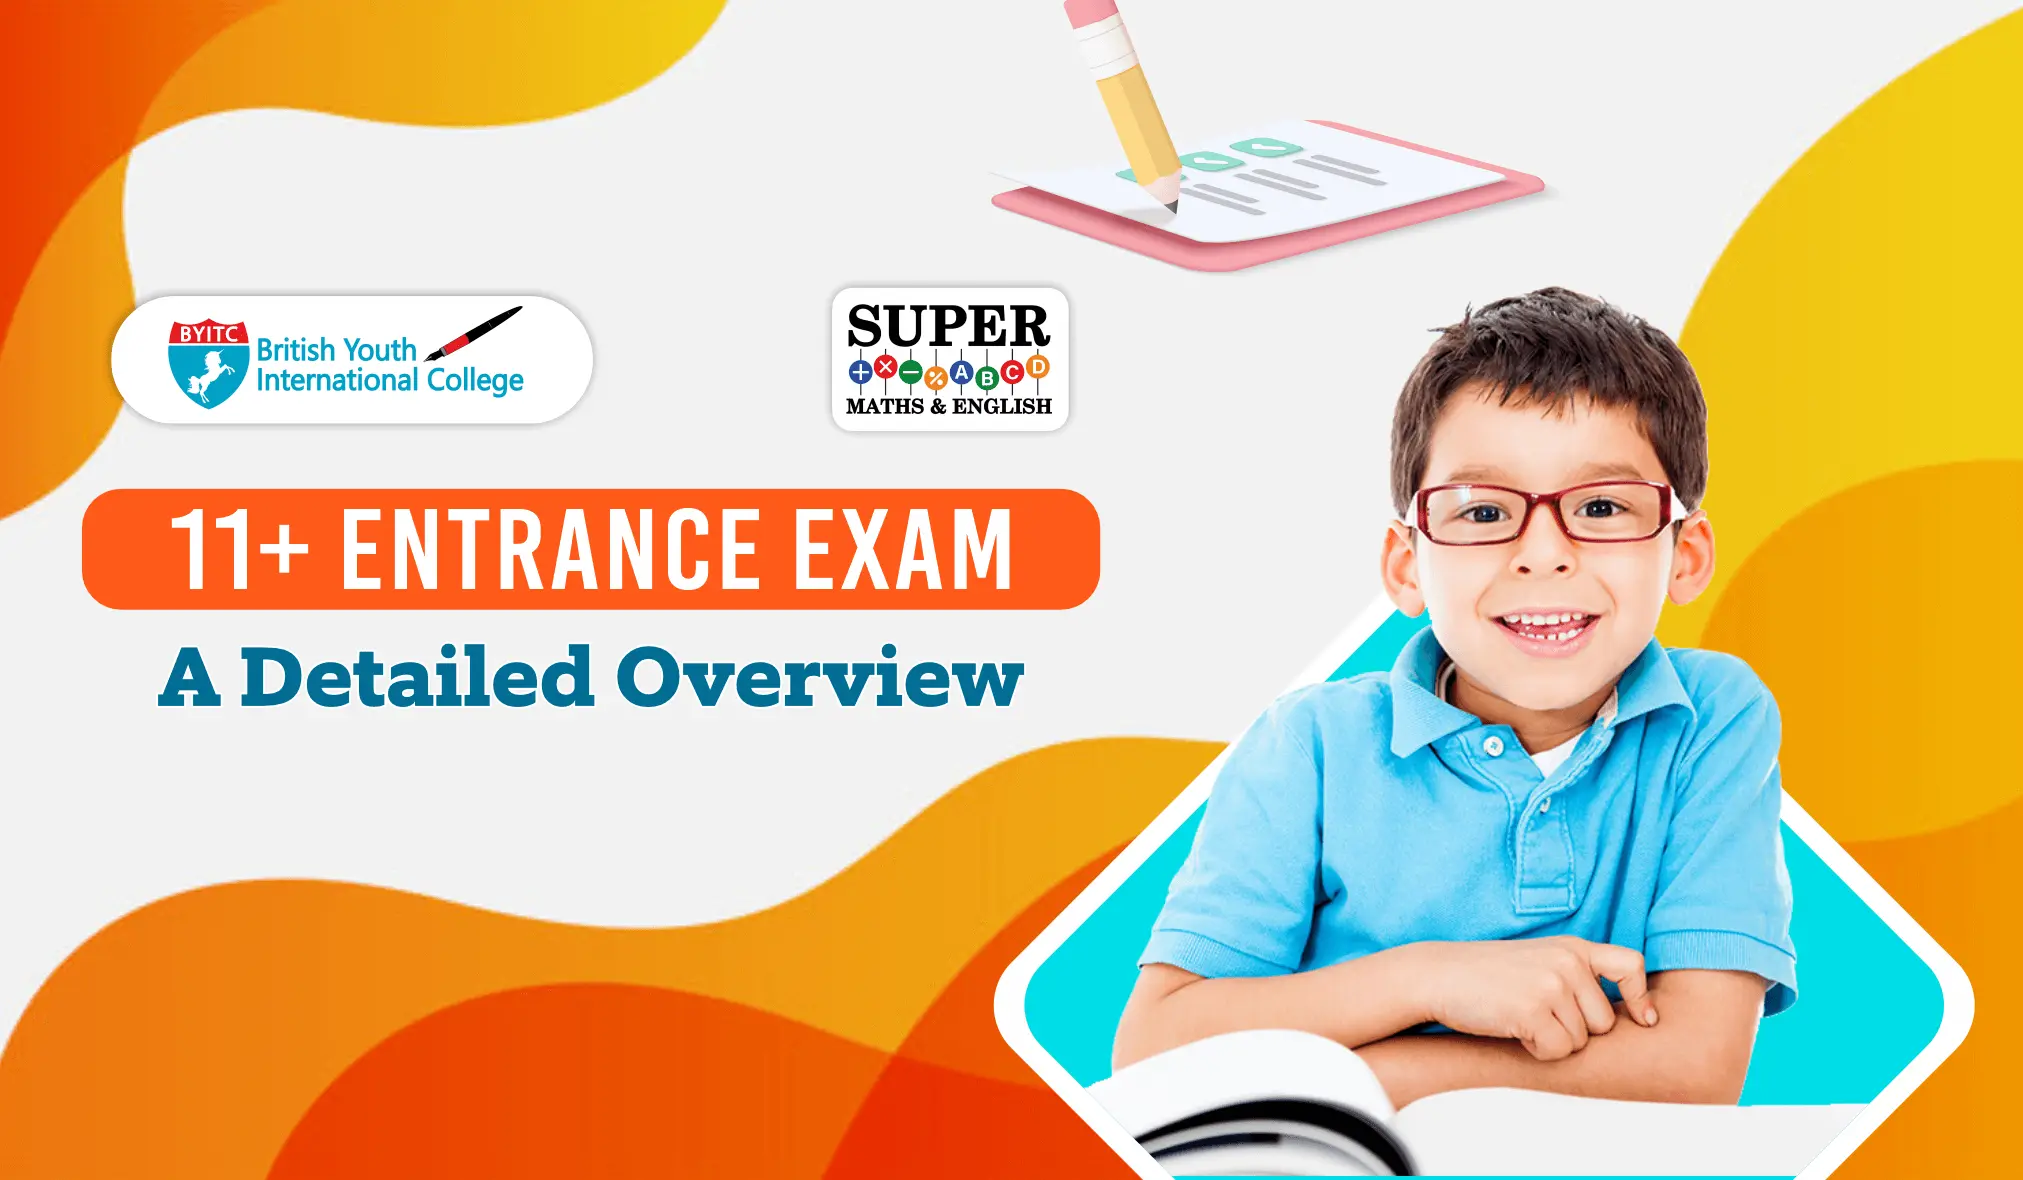 11+ Entrance Exam: A Detailed Overview | BYITC